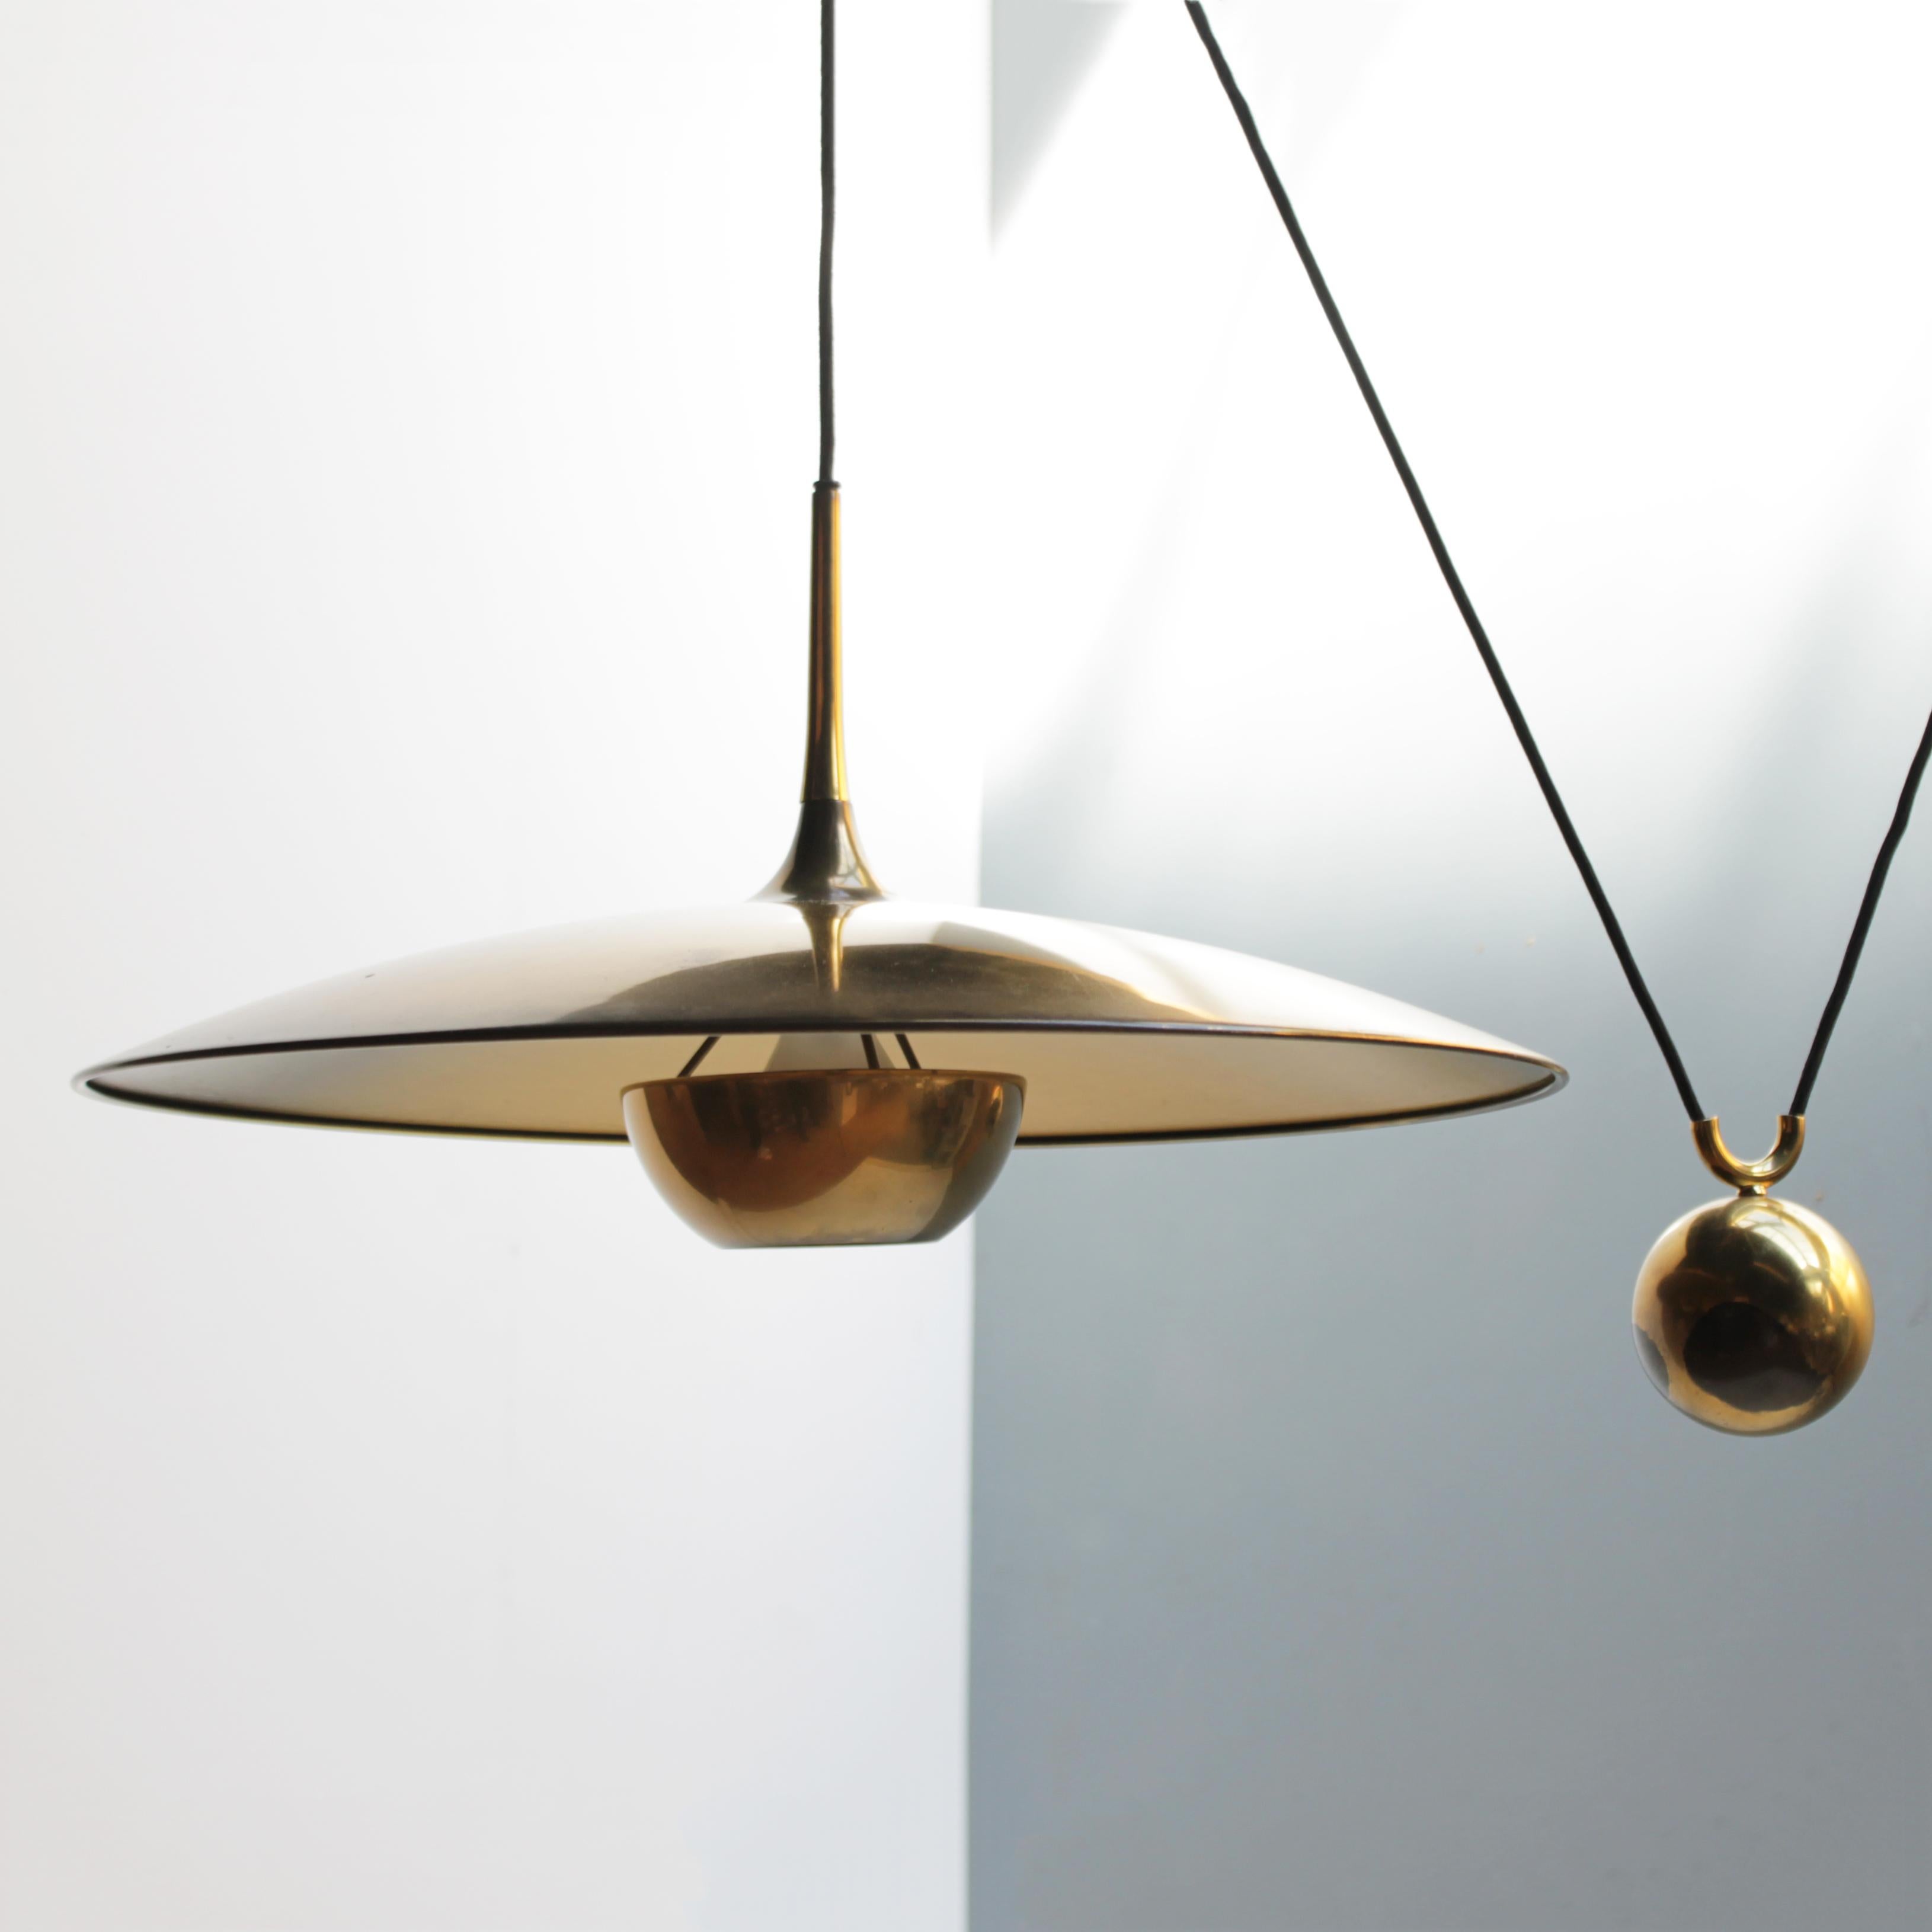 Original vintage modernist pendant, model Onos 55 in solid brass by Florian Schulz, circa 1975. 
The outer surface of the shade is in polished brass, while the inside has a brushed texture. With a brass reflector. This is the side counterweight